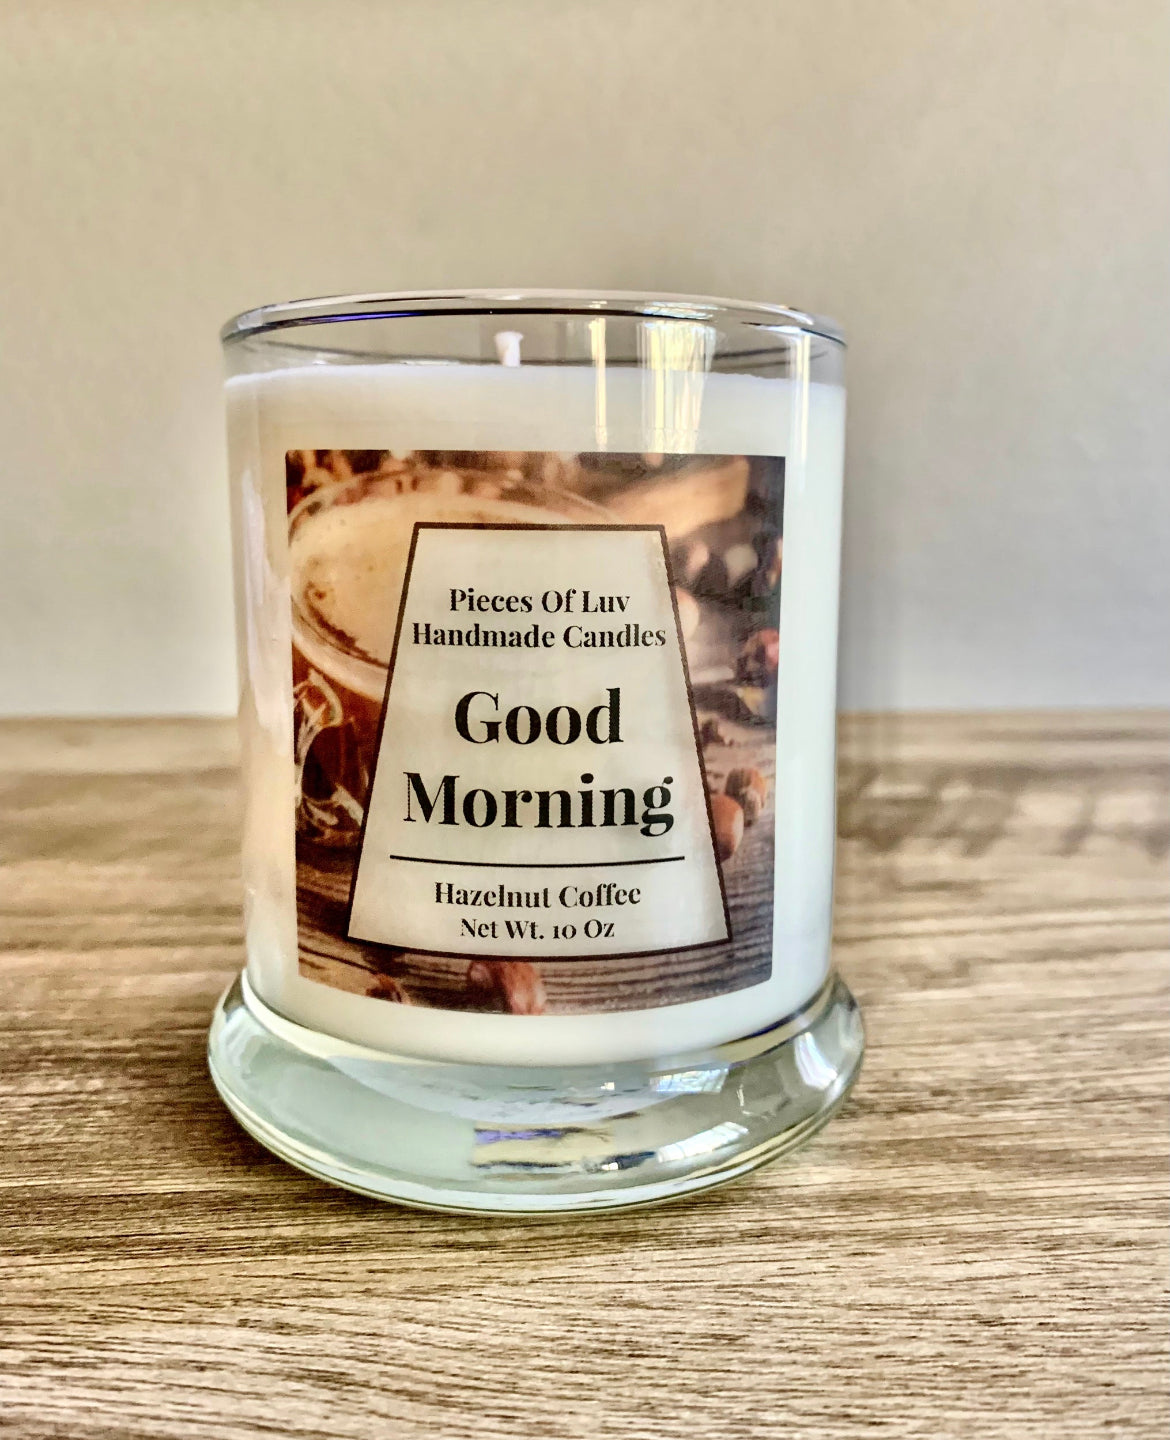 Good Morning - Pieces Of Luv Handmade Candles 